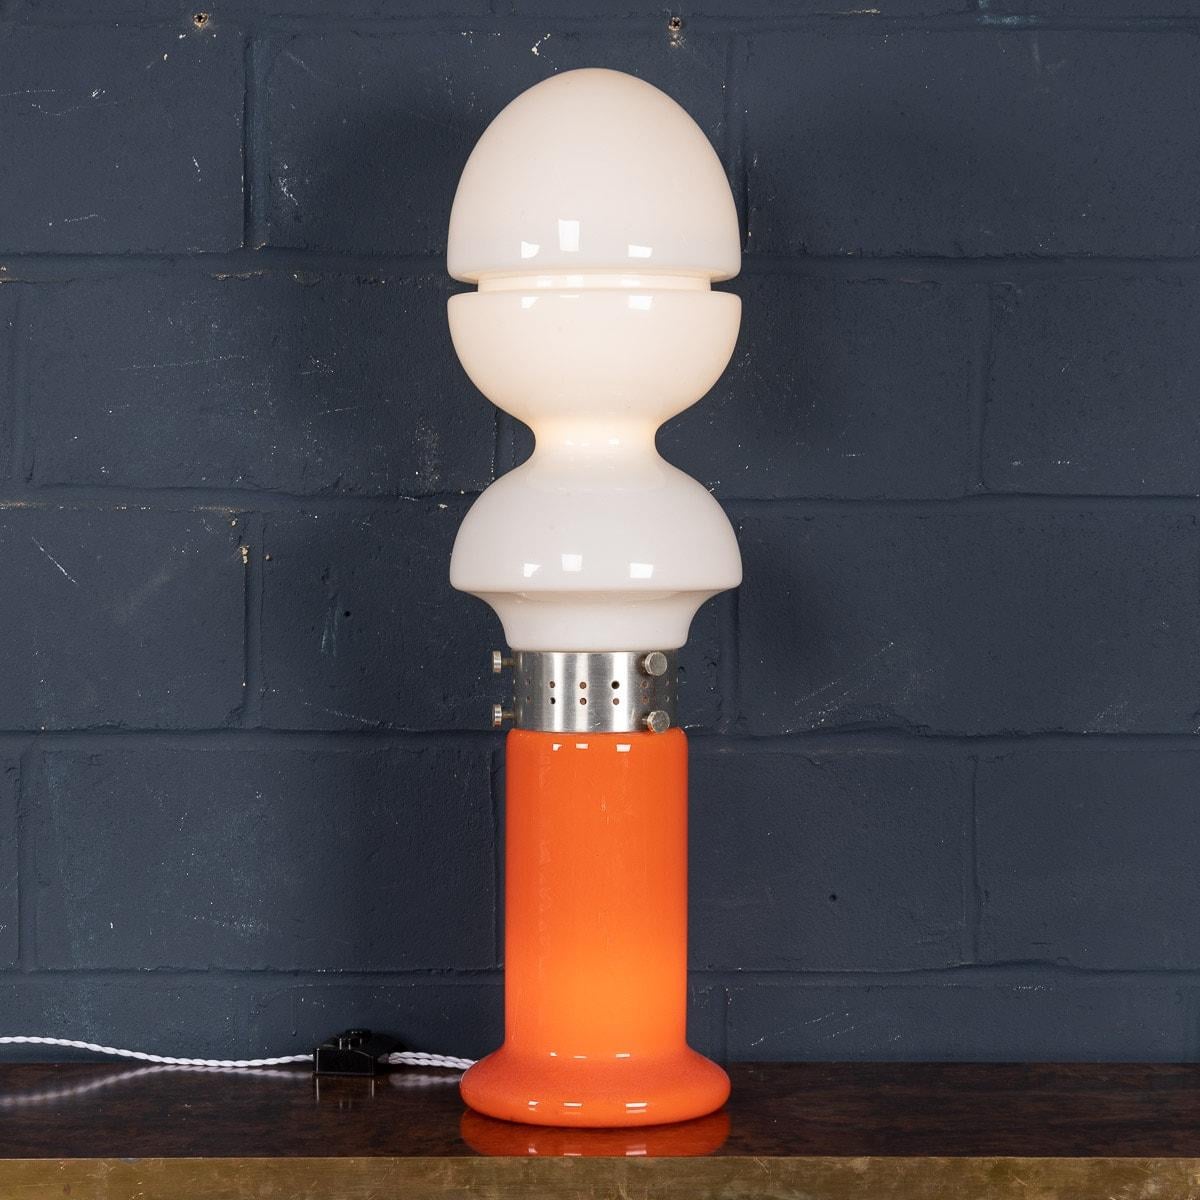 A wonderful vintage Italian table lamp made by Carlo Nason for Mazzega. Produced in Murano, Venice in the 1970s, this chrome and glass lamp exemplifies Carlo Nason’s workmanship. Using vibrant colours, Nason has used a bright orange glass for the